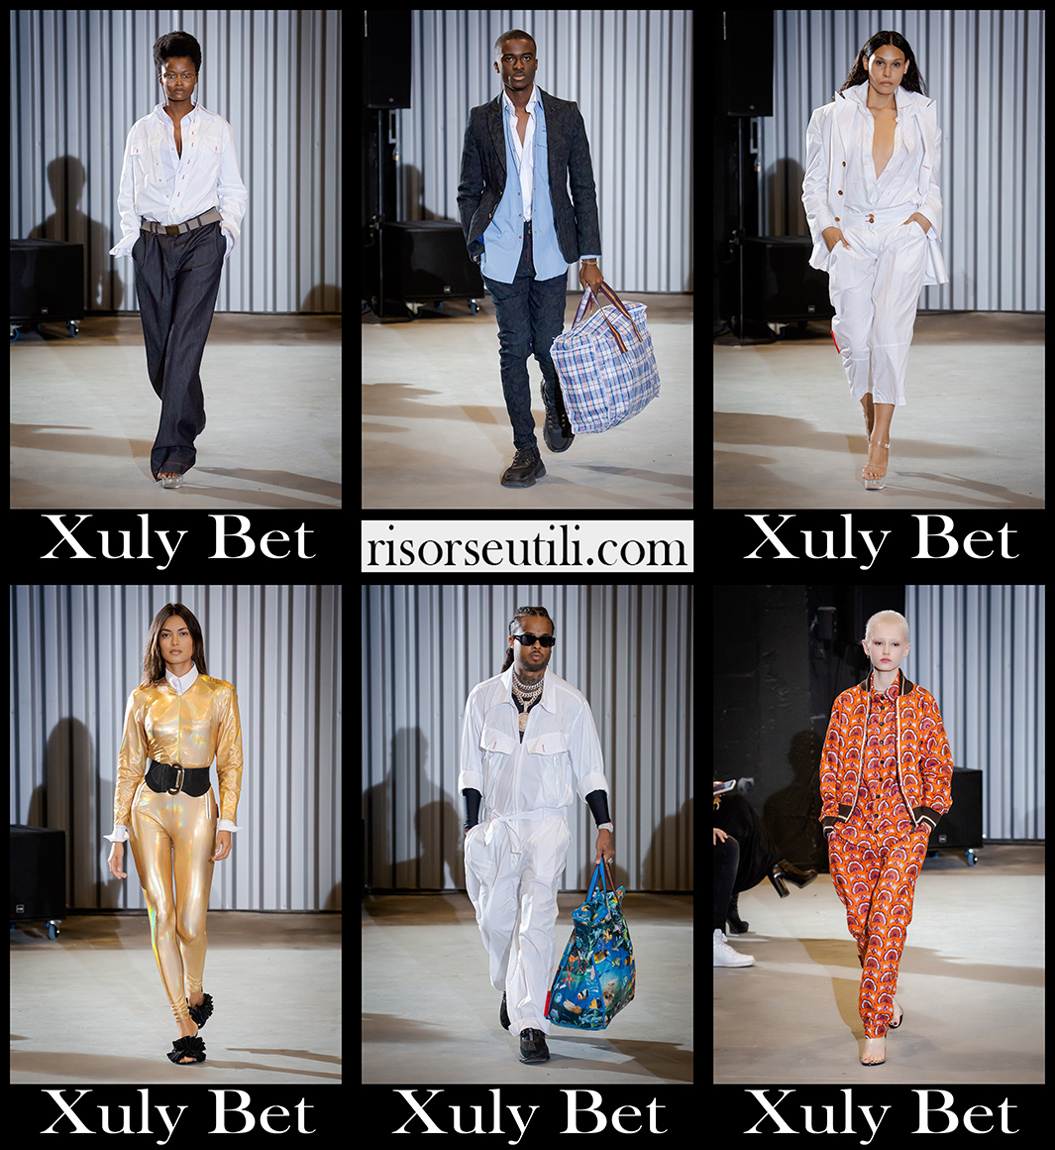 Xuly Bet spring summer 2021 womens fashion collection